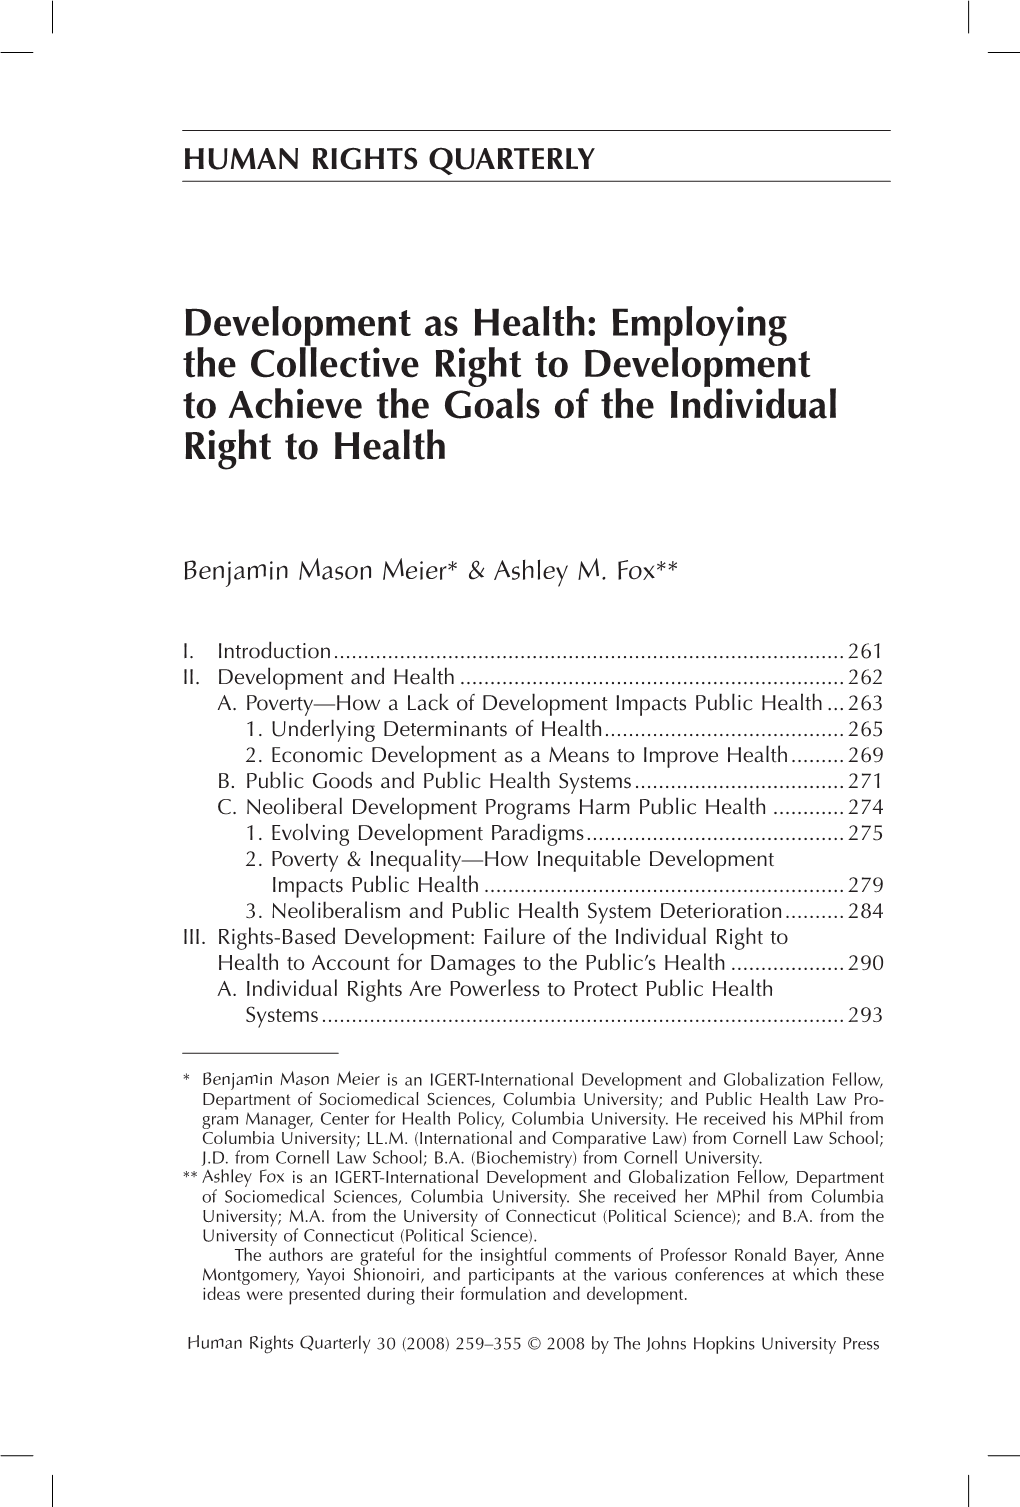 Development As Health: Employing the Collective Right to Development to Achieve the Goals of the Individual Right to Health